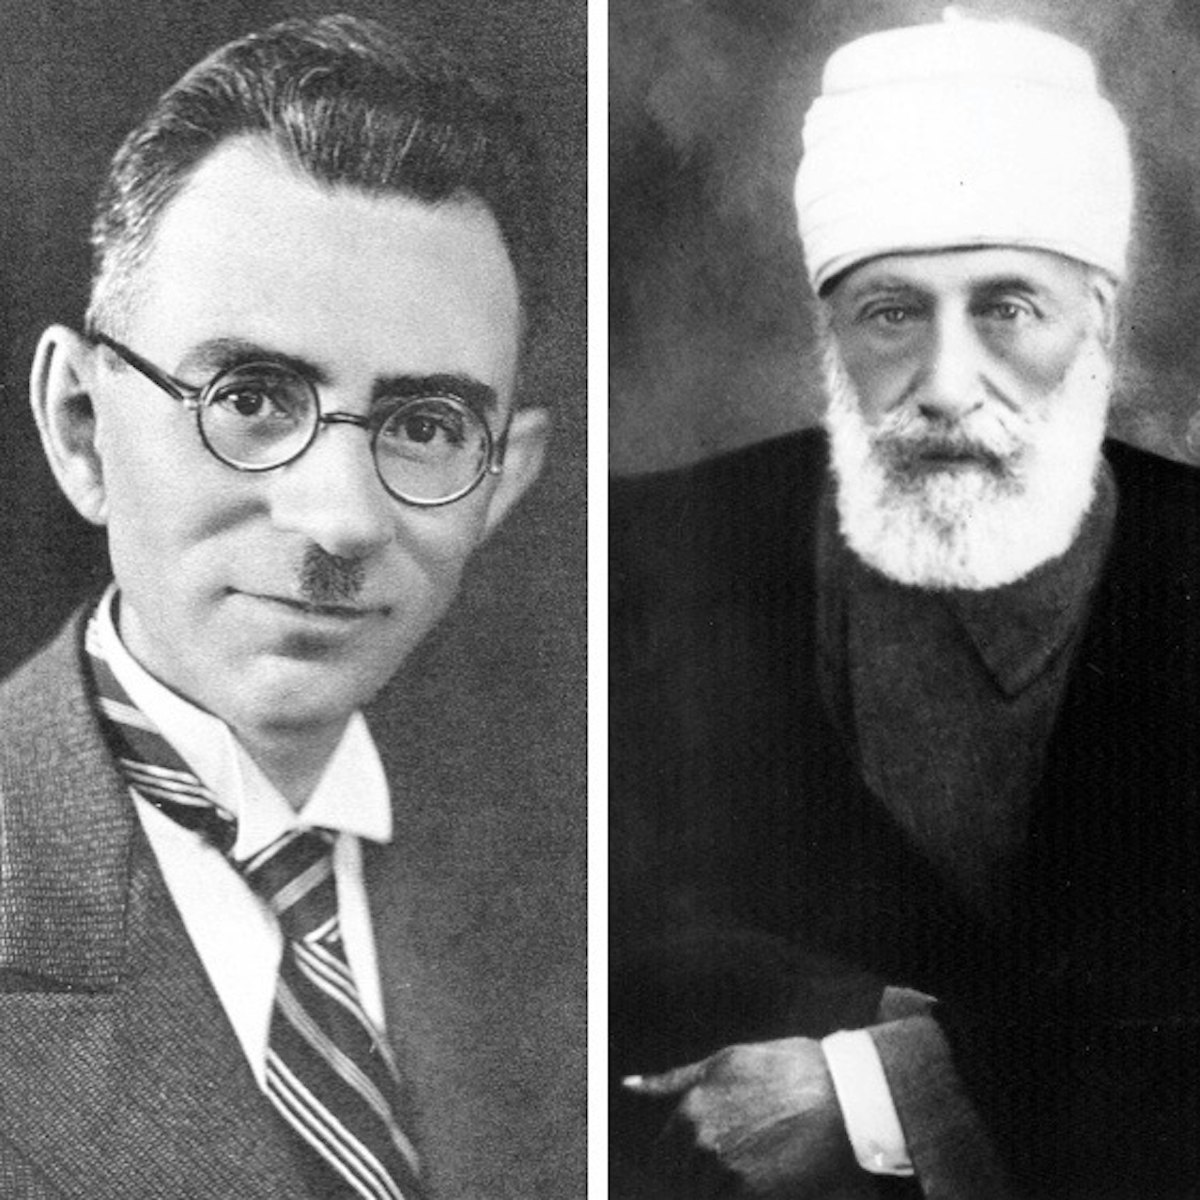 Ahmad Yazdani and ‘Ali-Muhammad Ibn-i-Asdaq wrote to the Central Organization for a Durable Peace in 1915 at ‘Abdu’l-Bahá’s encouragement. He tasked them with delivering to the Organization’s Executive Committee His First Tablet to The Hague. (Credit: bahaigeschiedenis.nl)